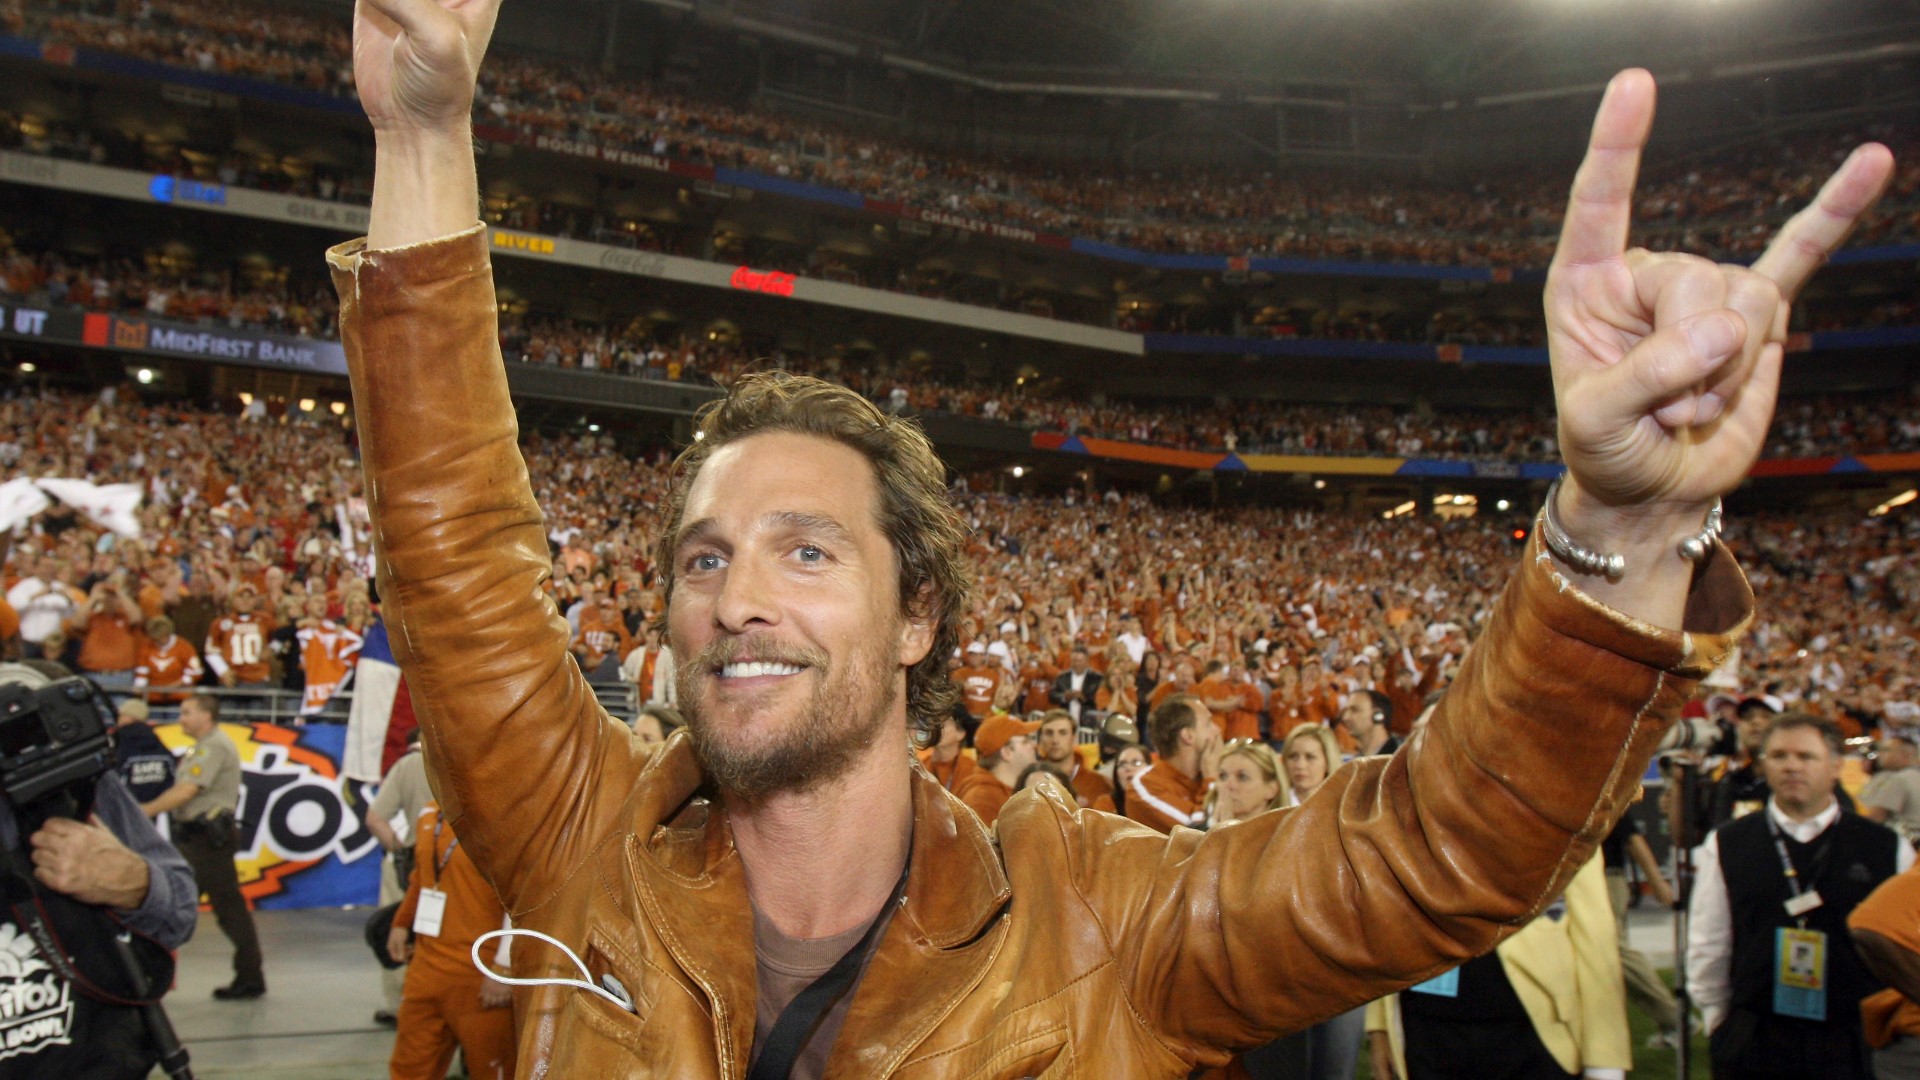 McConaughey has been a guest instructor since 2015, but this is his first semester as a full-time staff member.